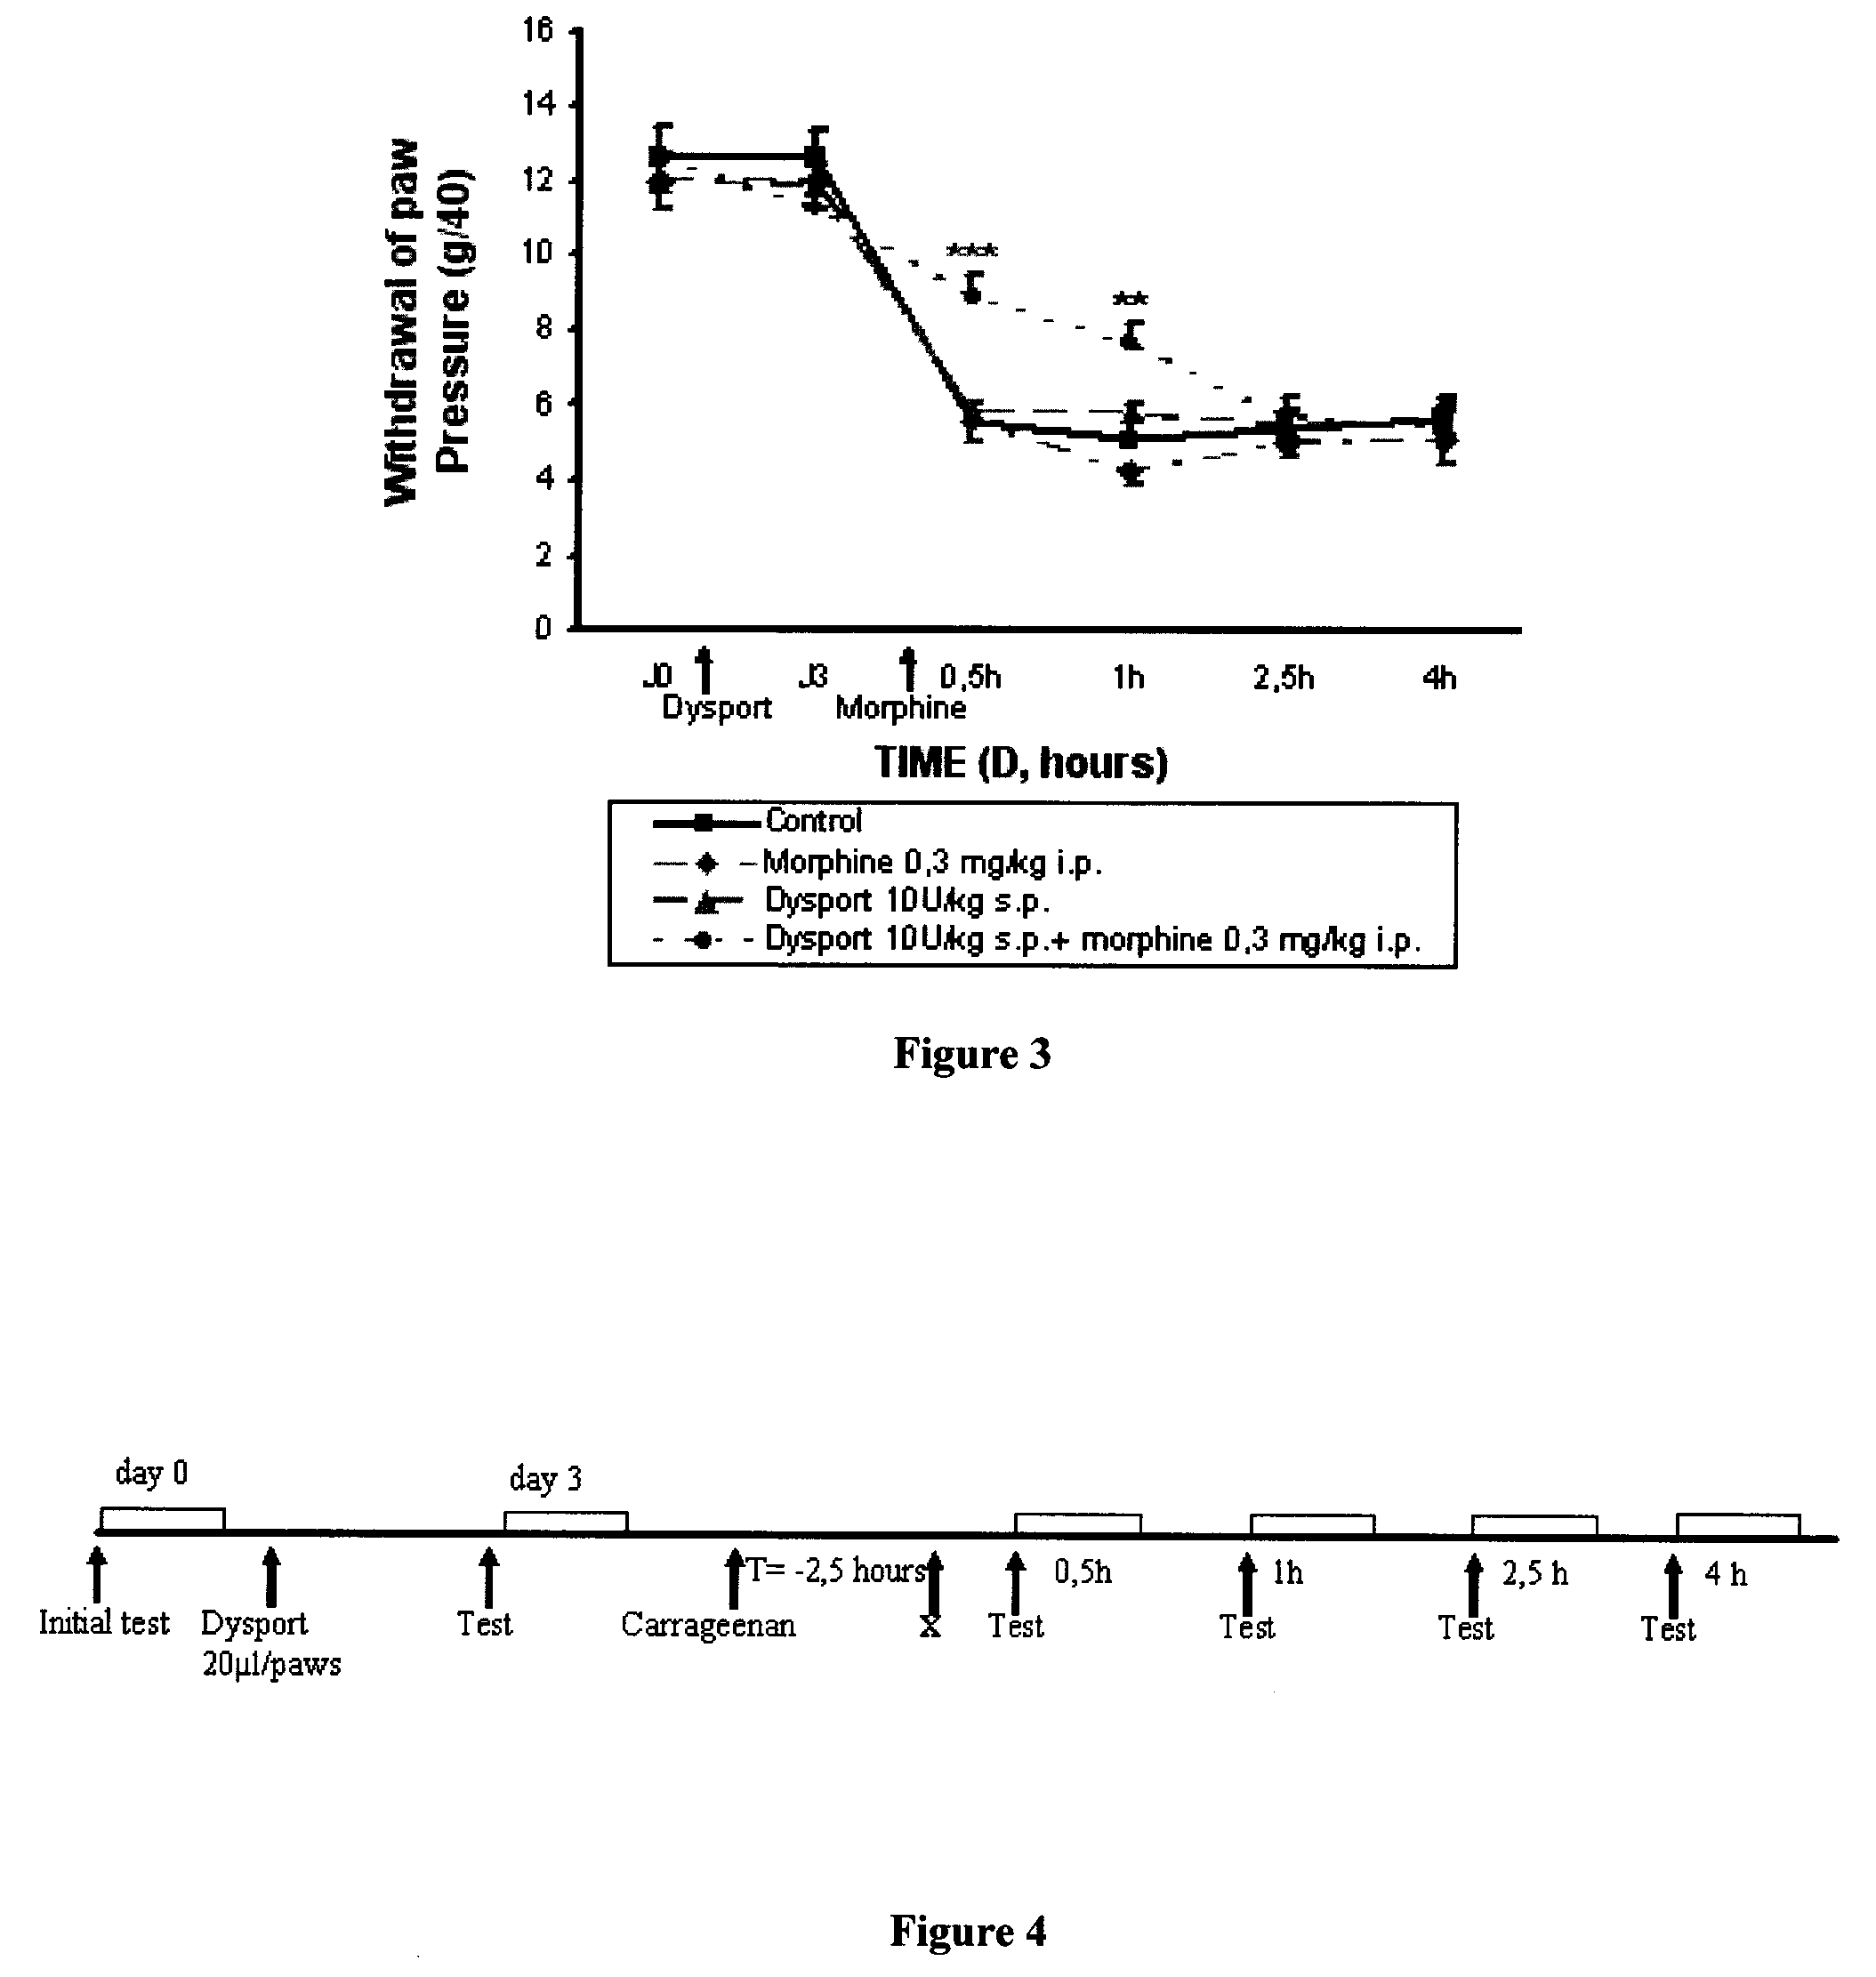 Simultaneous, separate or sequential therapeutic use of at least one botulinum neurotoxin and of at least one opiate derivative